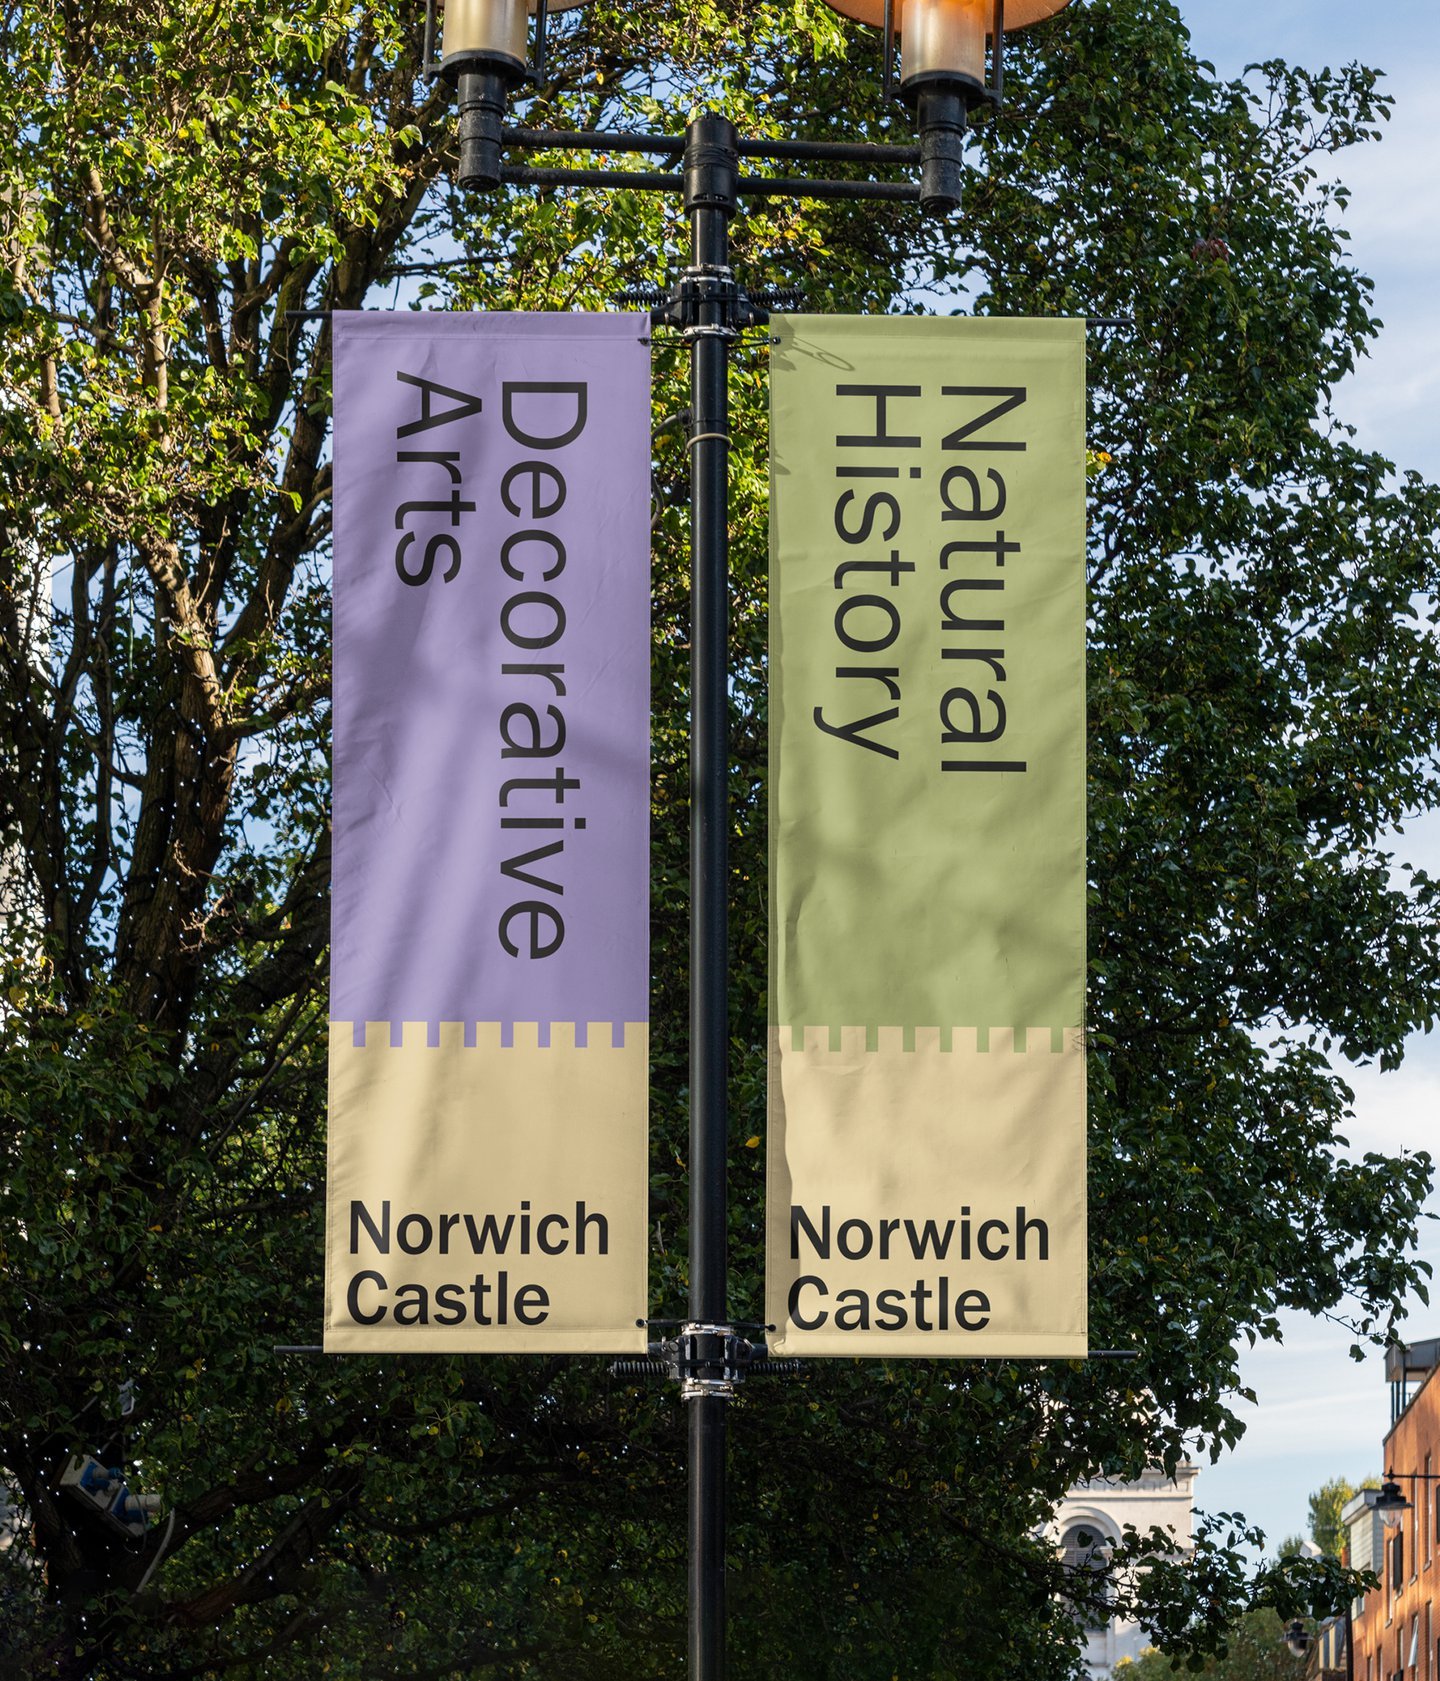    INSPIRATION, ART &amp; DESIGN, NORWICH CASTLE, REBRAND, great design, expertly applied, example, redesign for Norwich castle, starting point, very simple but highly effective motif, different applications , visual joy, project, design project, ide